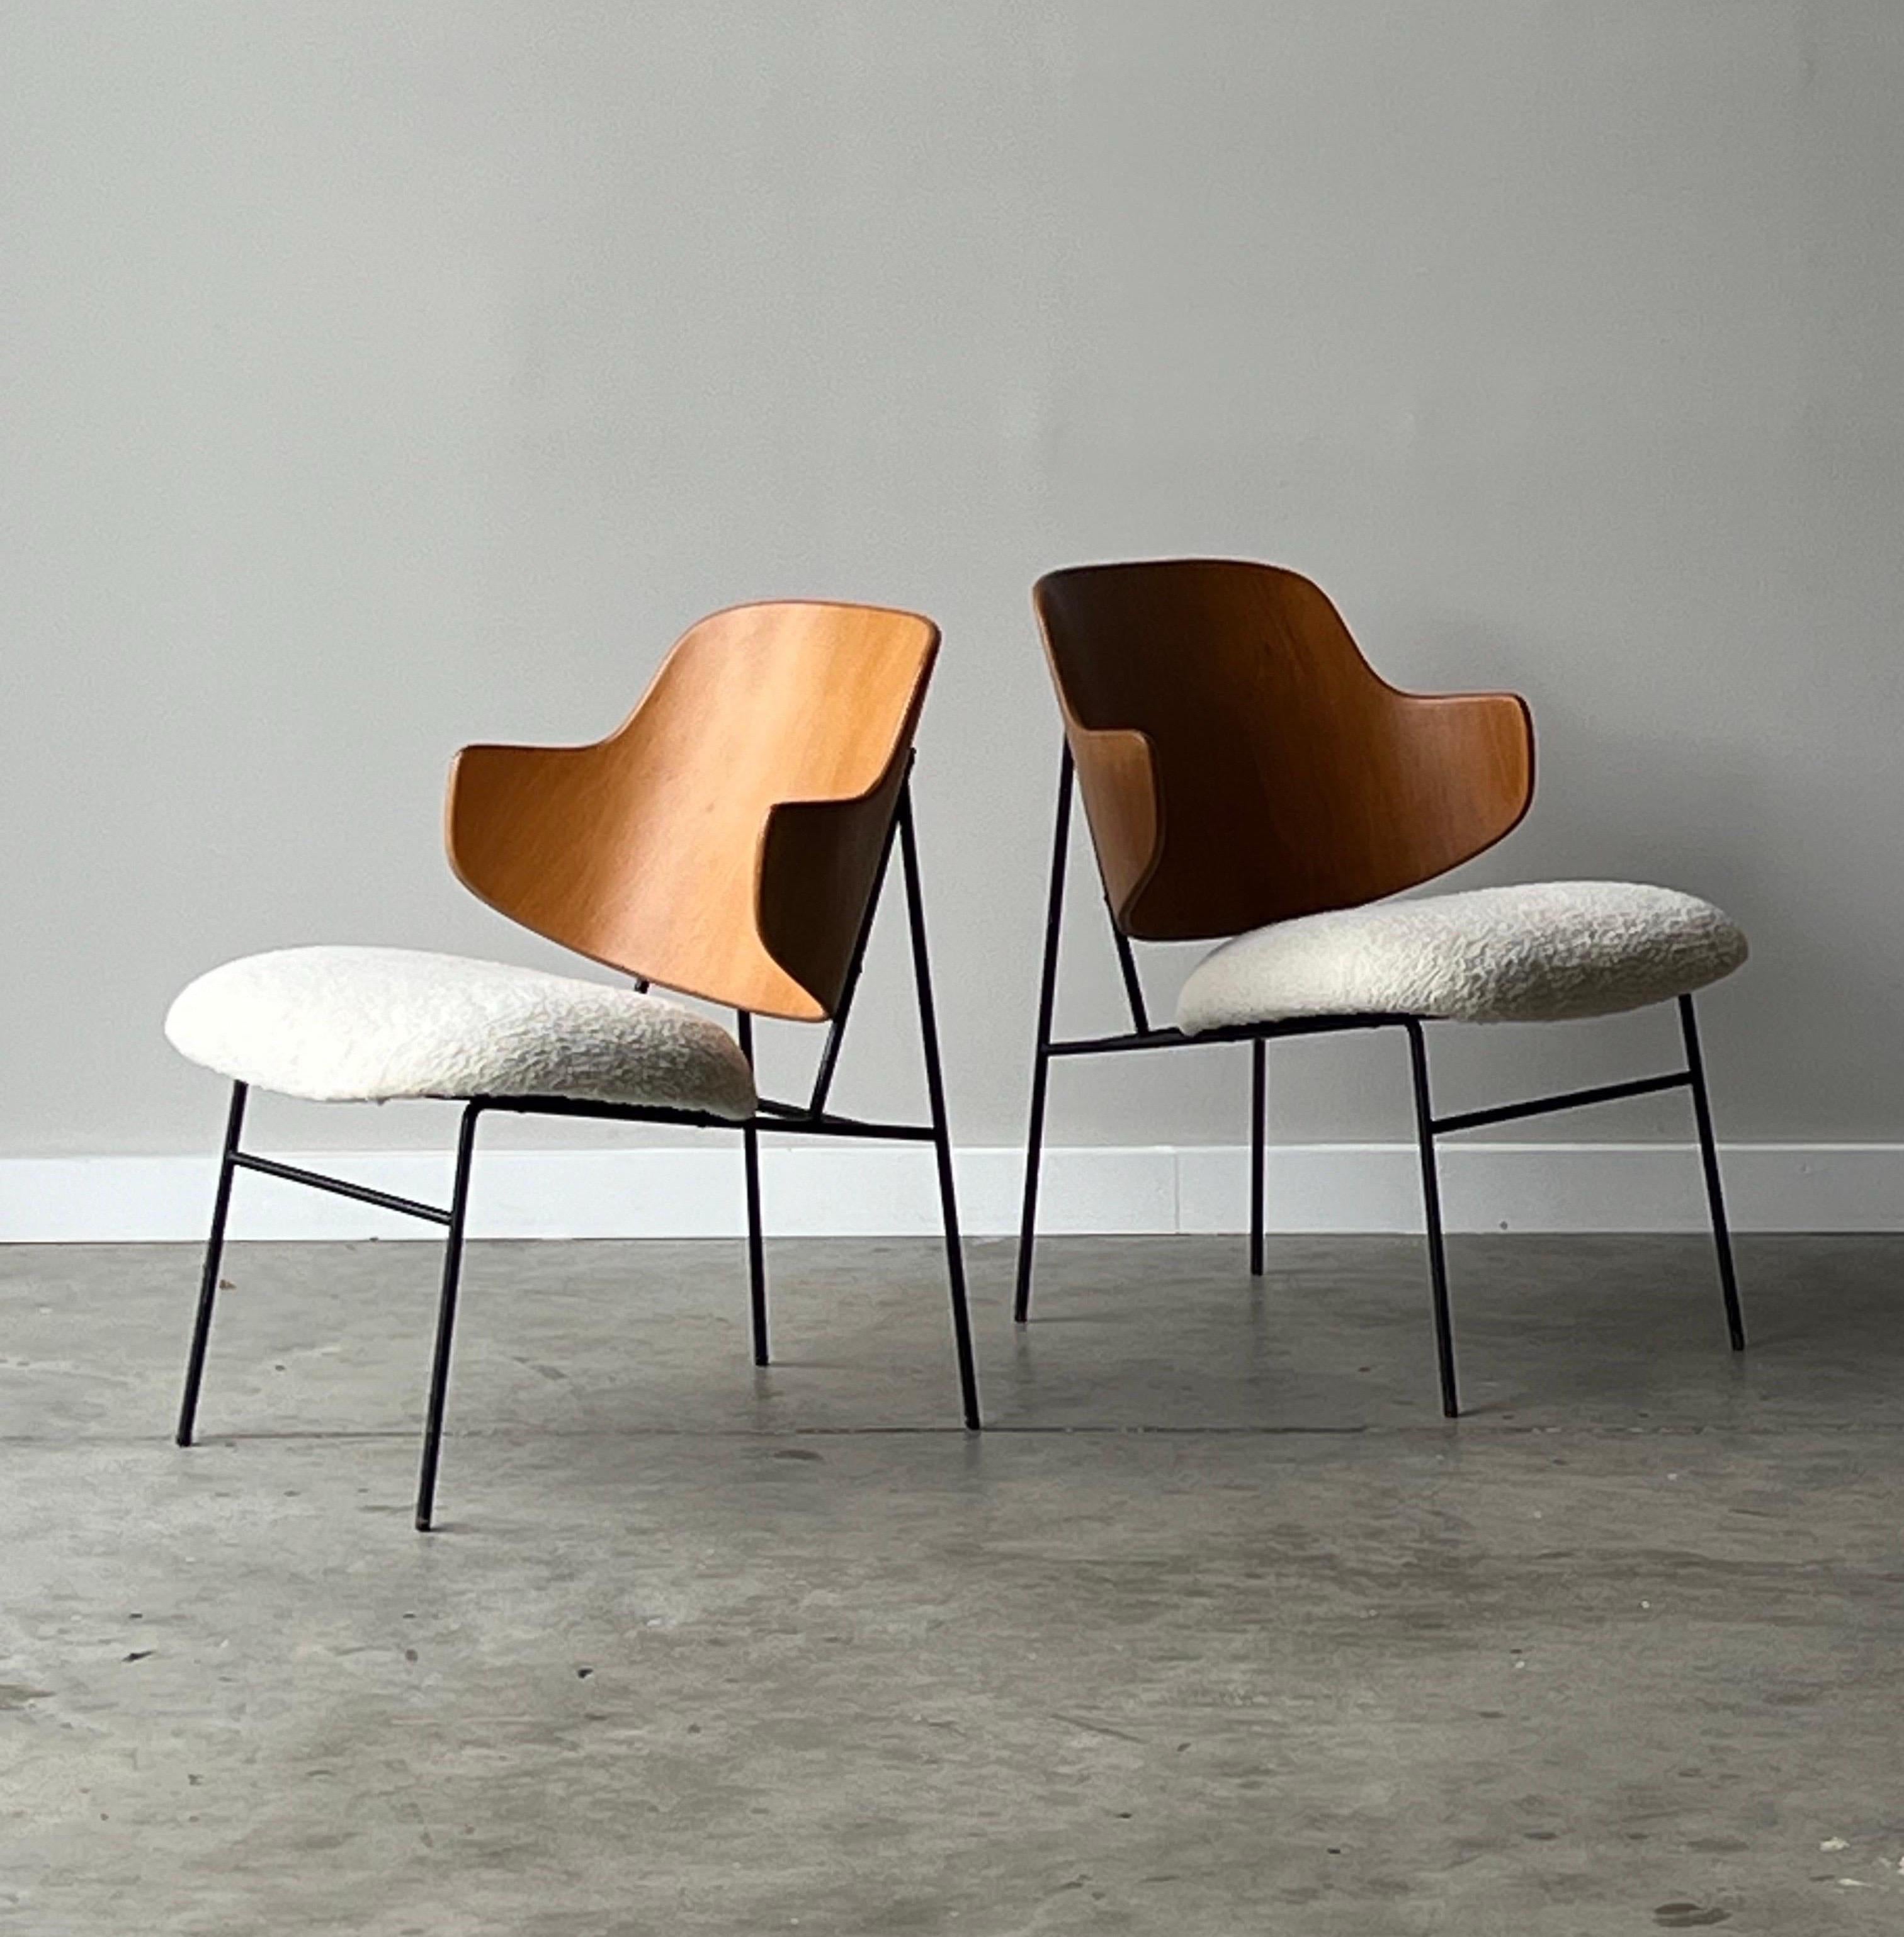 Mid-century pair of ‘Penguin’ accent chairs. Designed by Ib Kofod Larsen for Selig, Denmark. These iconic chairs were designed in the 1950s with a limited production in the 1960s. They feature a uniquely bentwood back with a geometric frame and